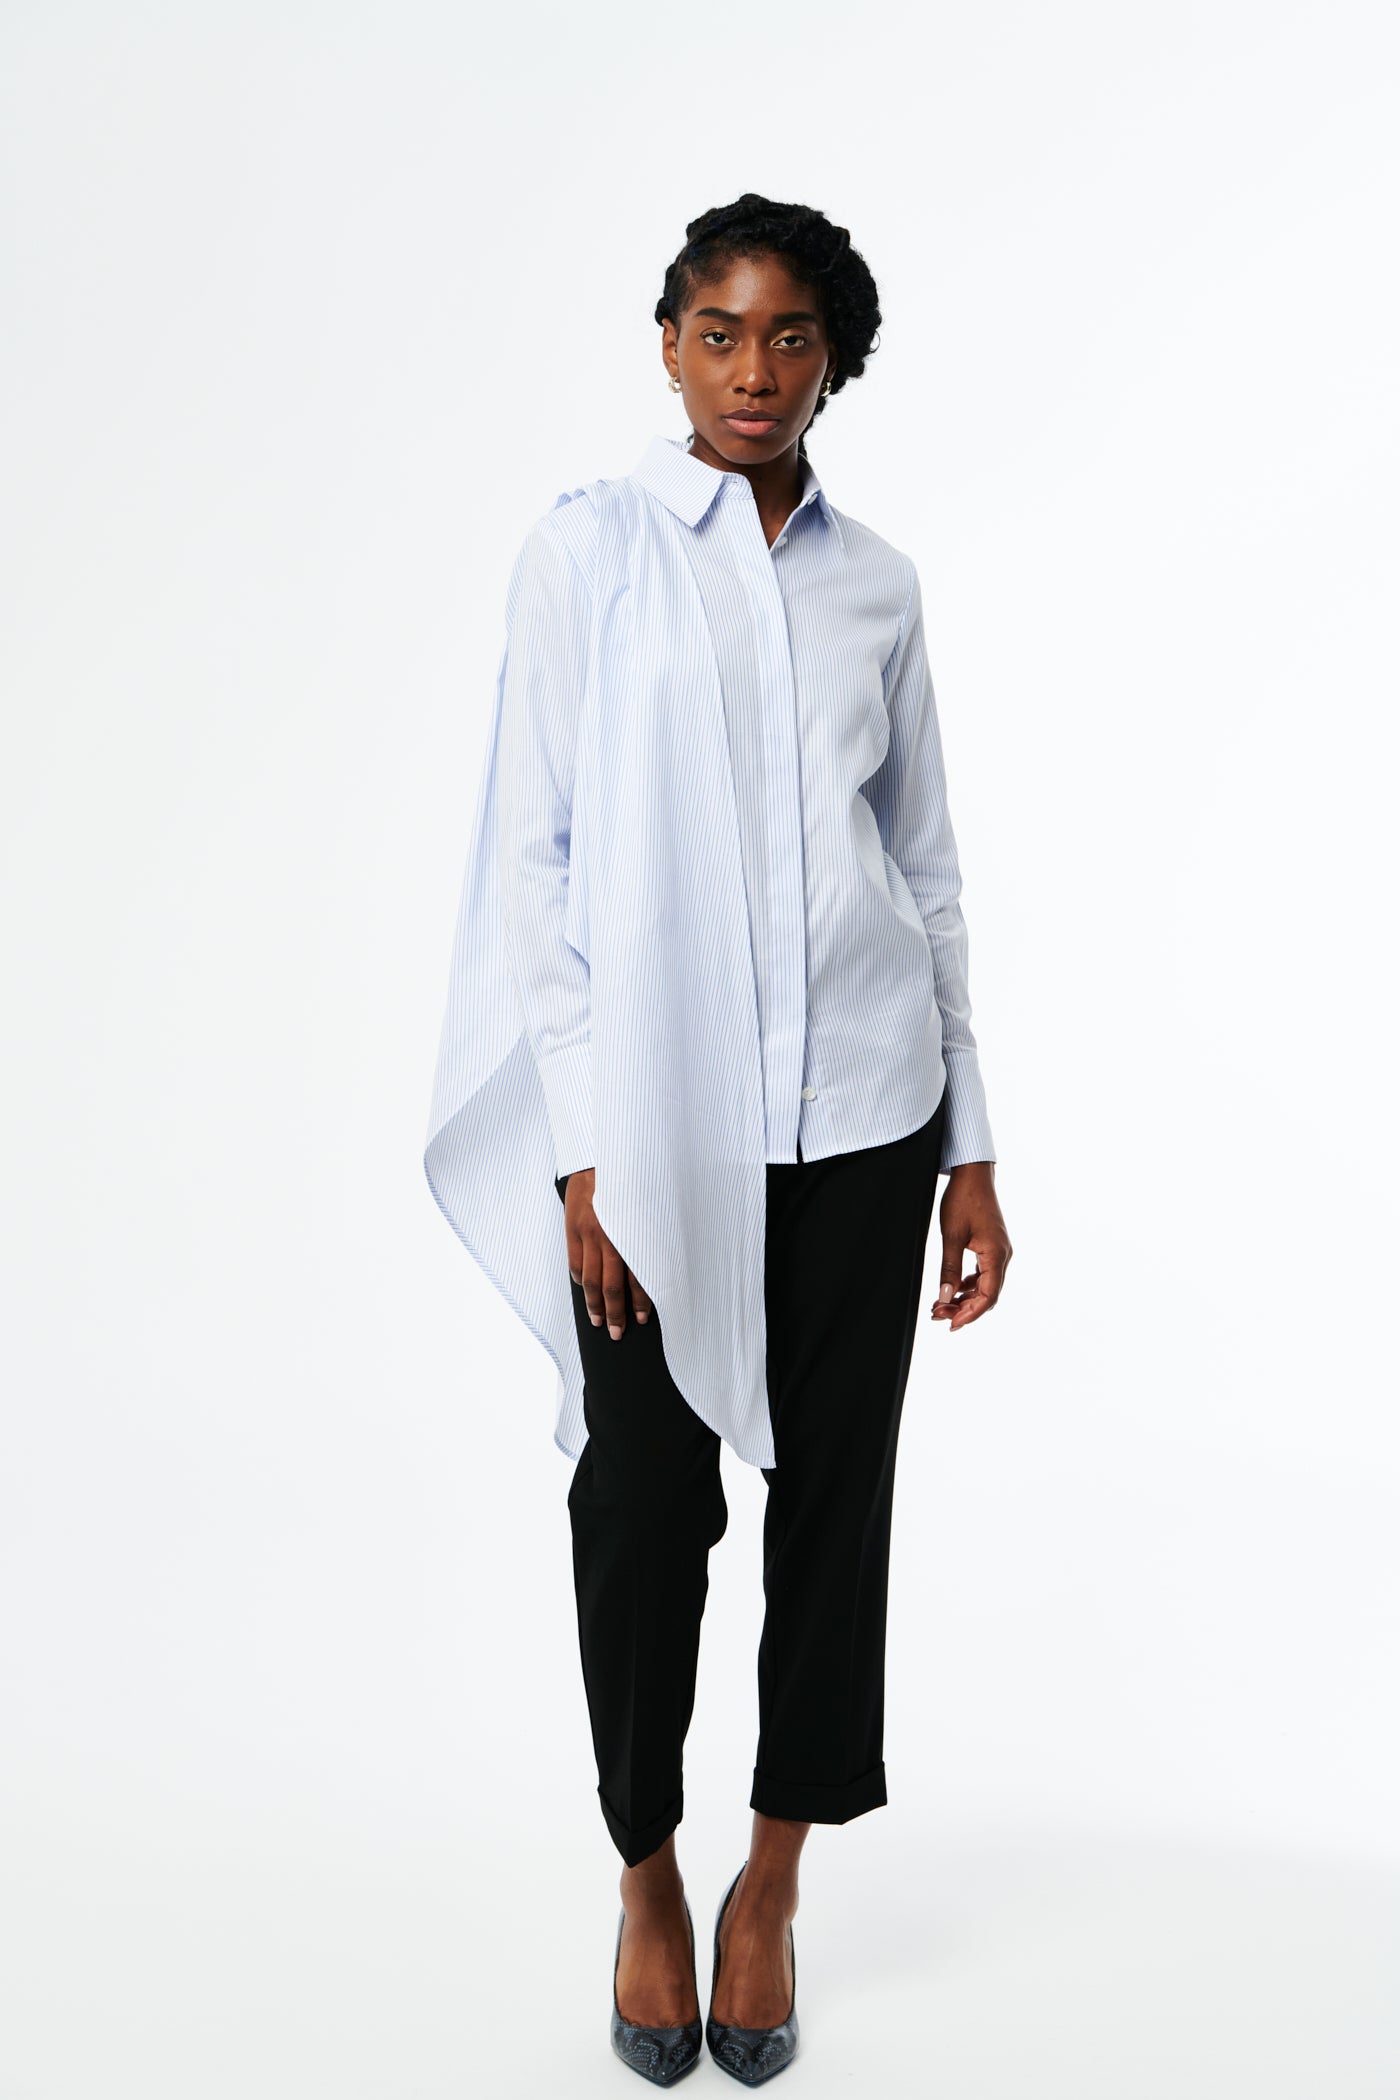 CAMISA Women's Button-Down Shirt with Removable Sleeves